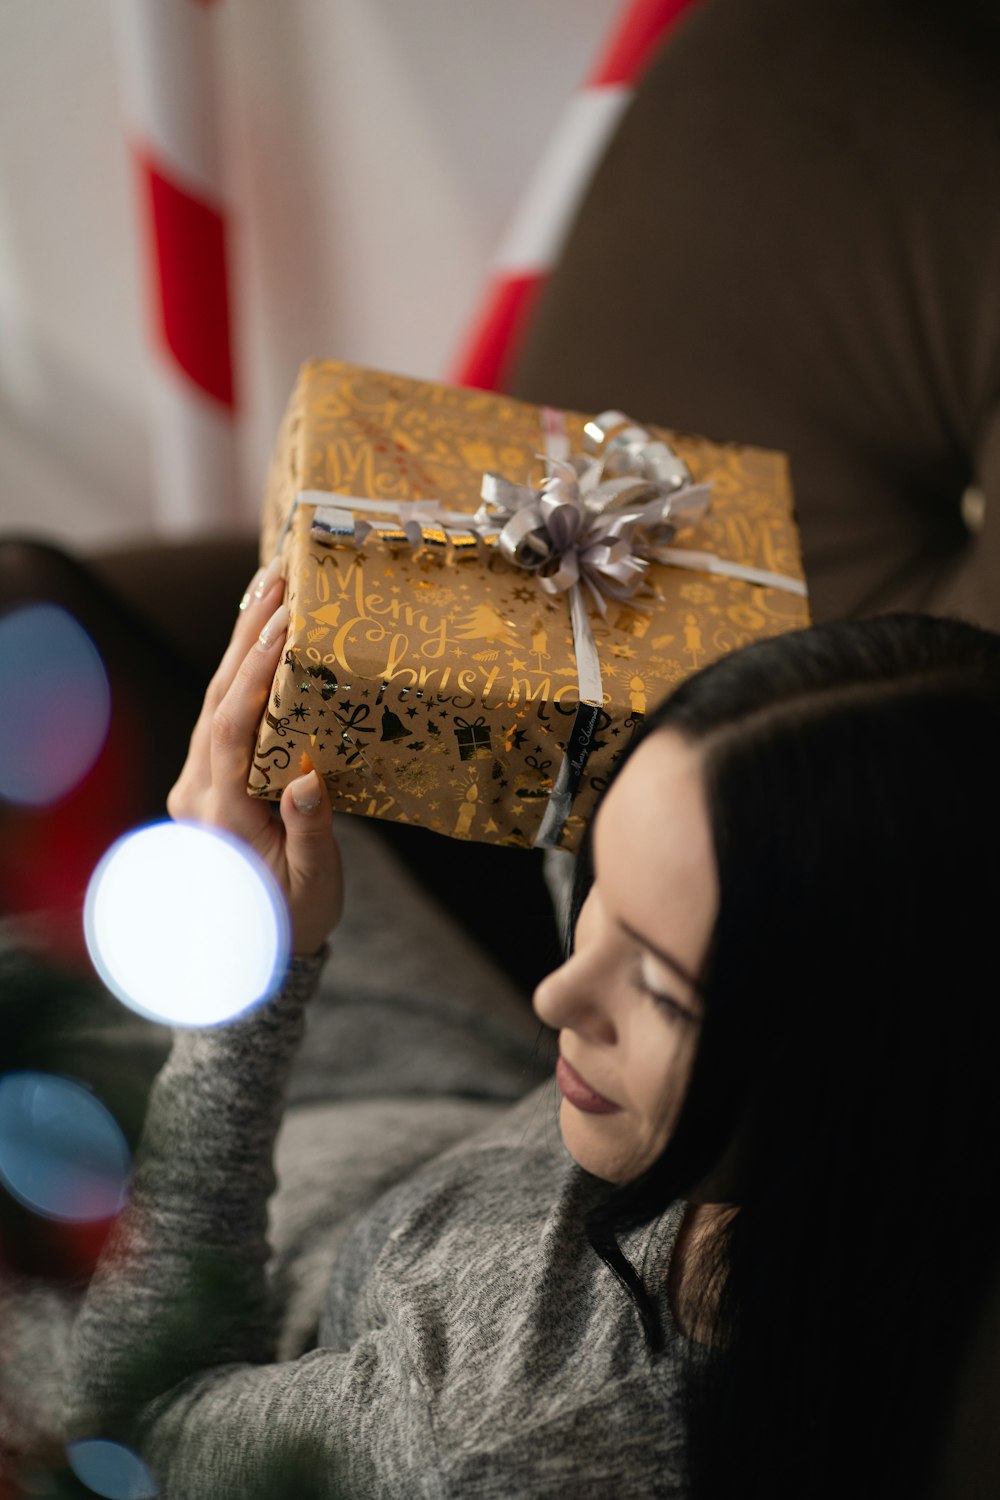 a woman sitting on a couch holding a wrapped present